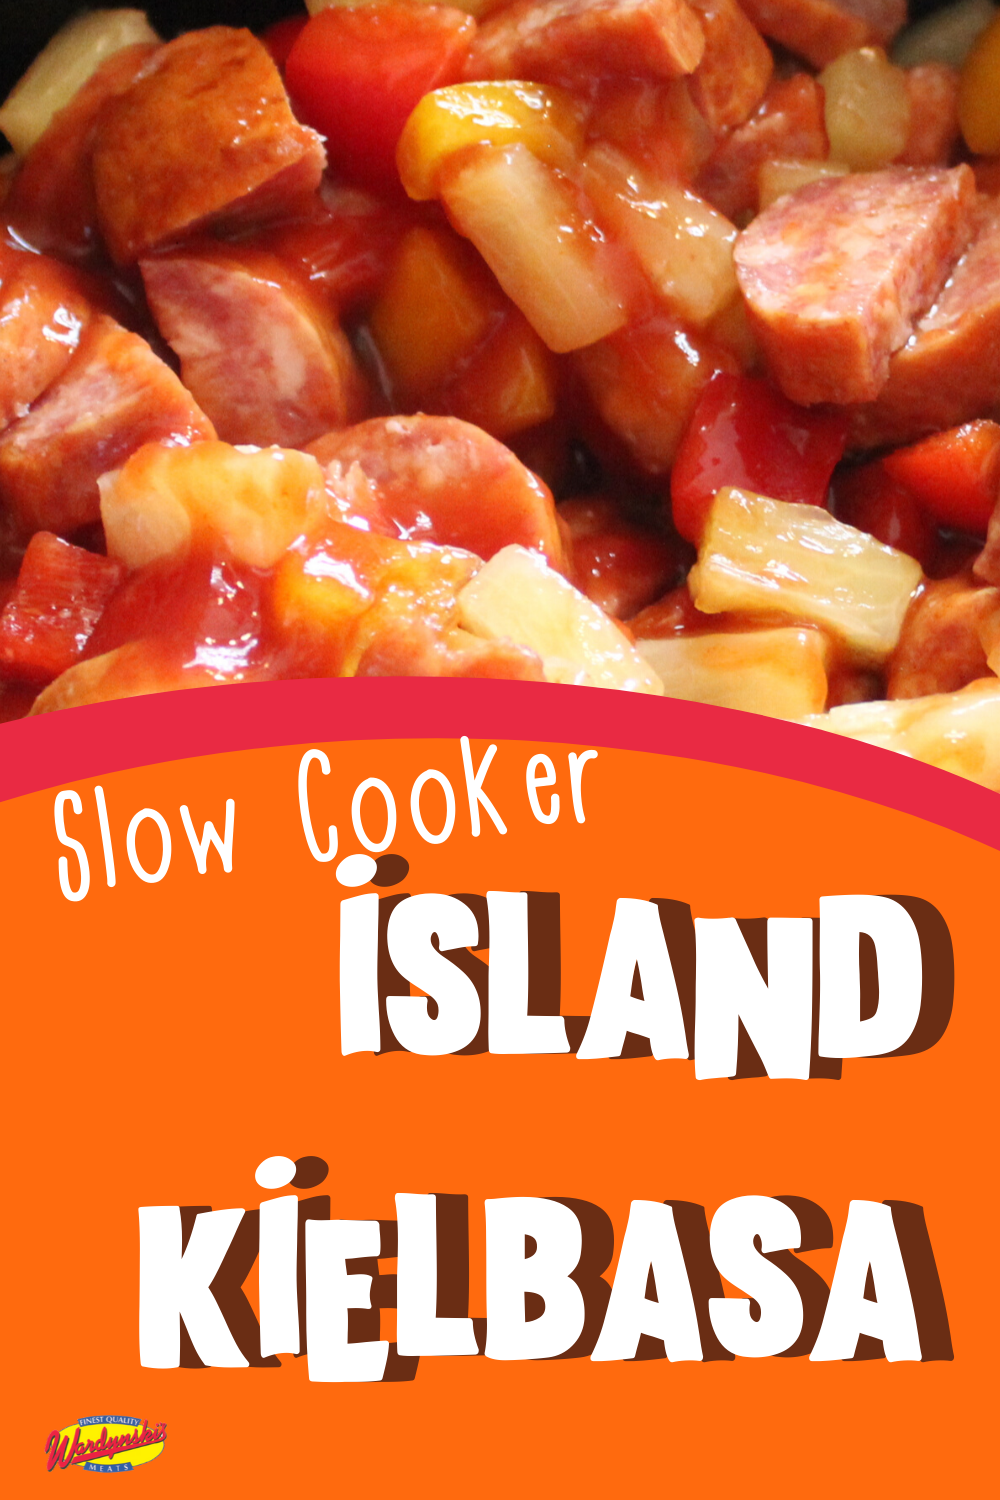 Sweet & Sour Kielbasa is a delicious and easy slow cooker recipe that combines pineapples, Polish sausage, and delicious sauce.